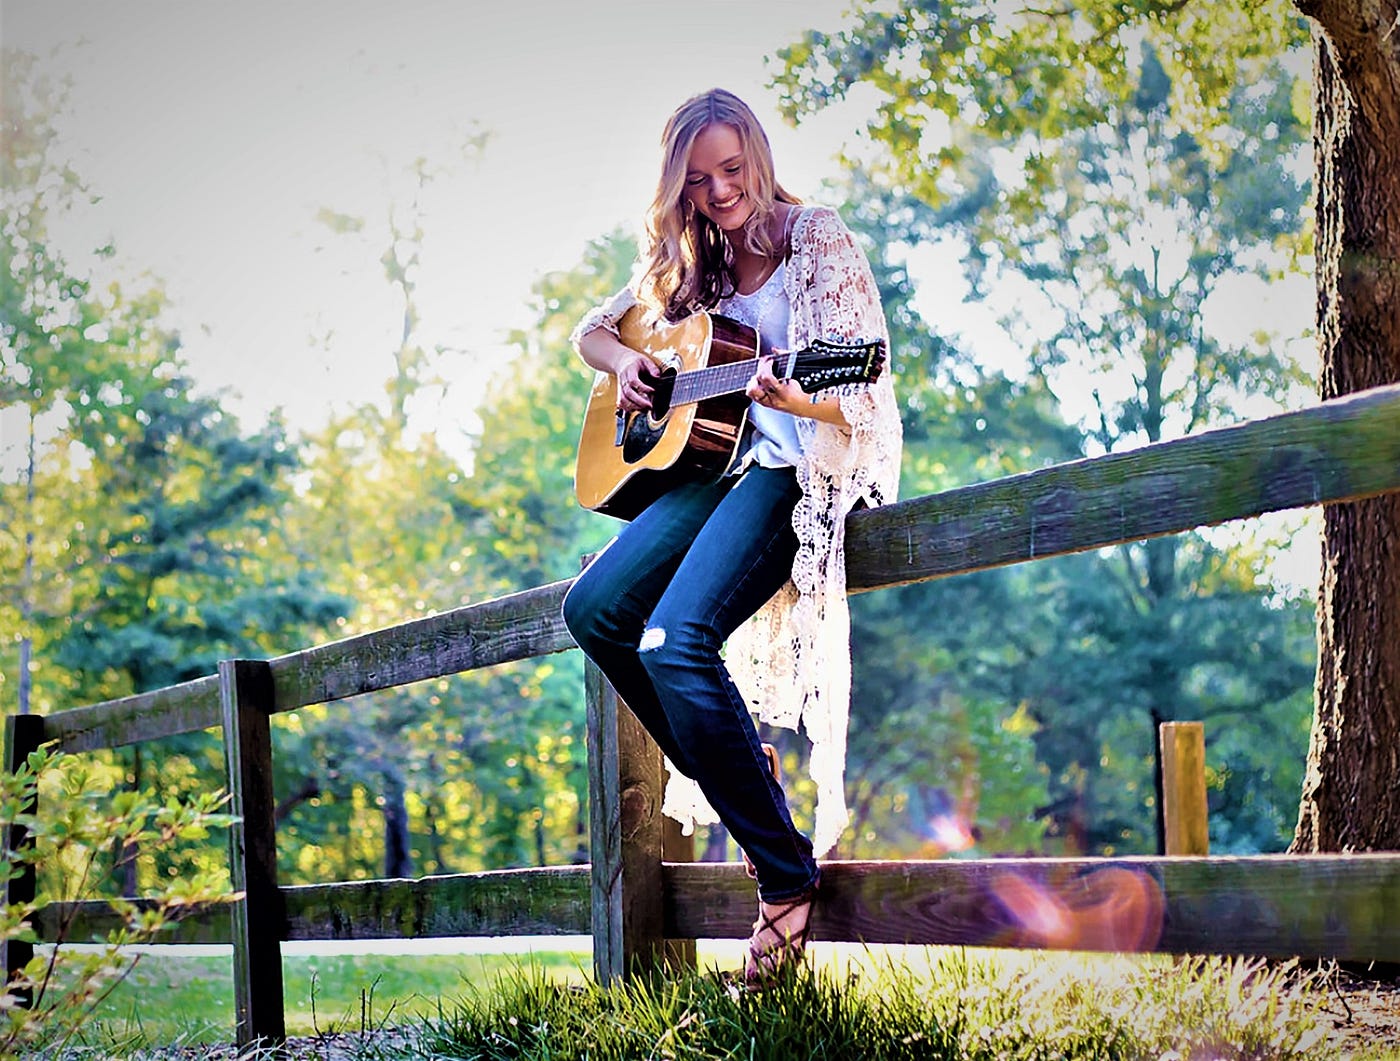 smiling girl with long blonde hair sitting on wooden fence and playing guitar